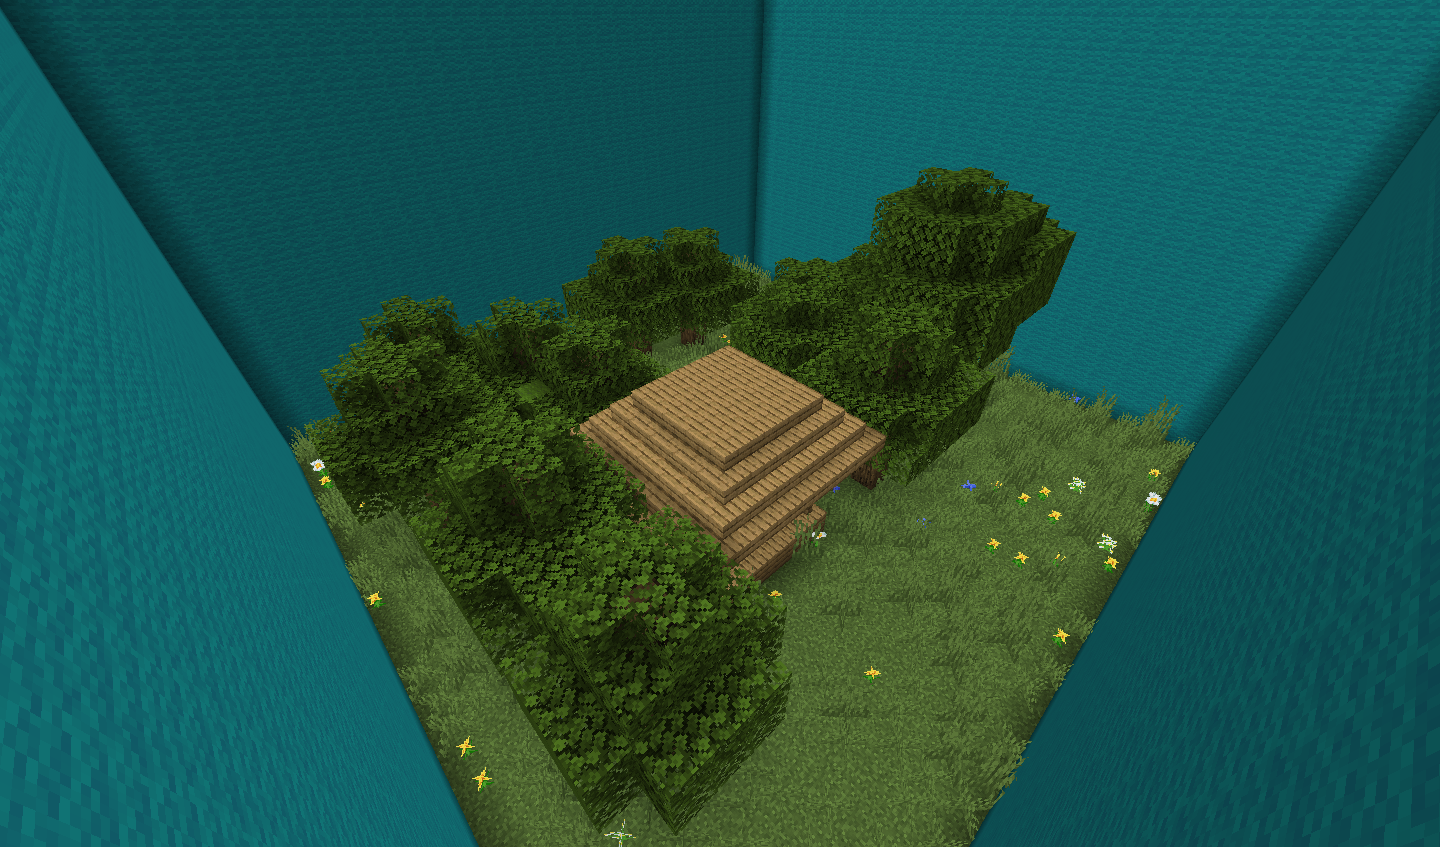 Download Find The Button: Biome Edition! 1.01 for Minecraft 1.18.1